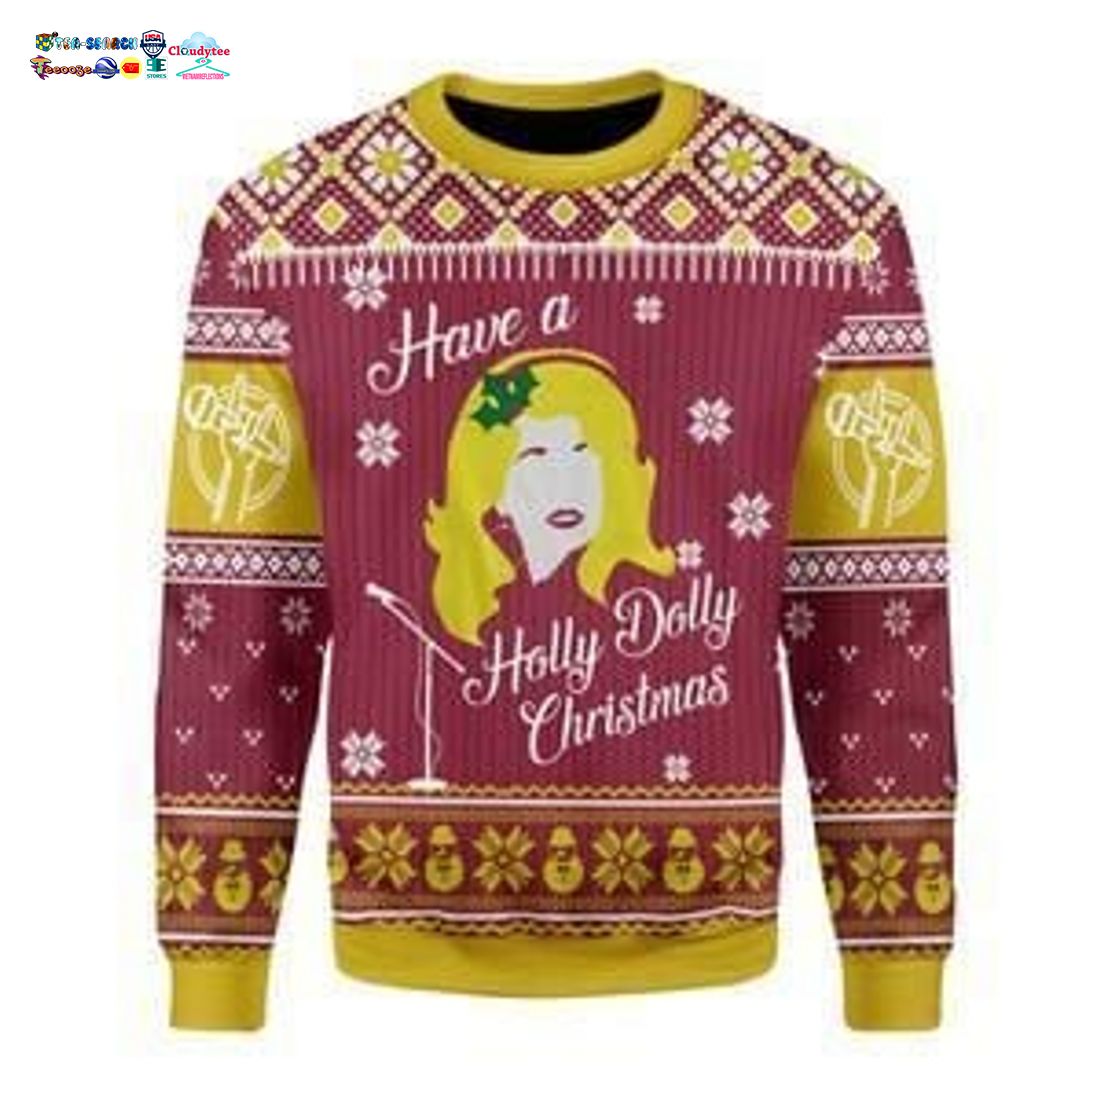 Have A Holly Dolly Christmas Ugly Christmas Sweater